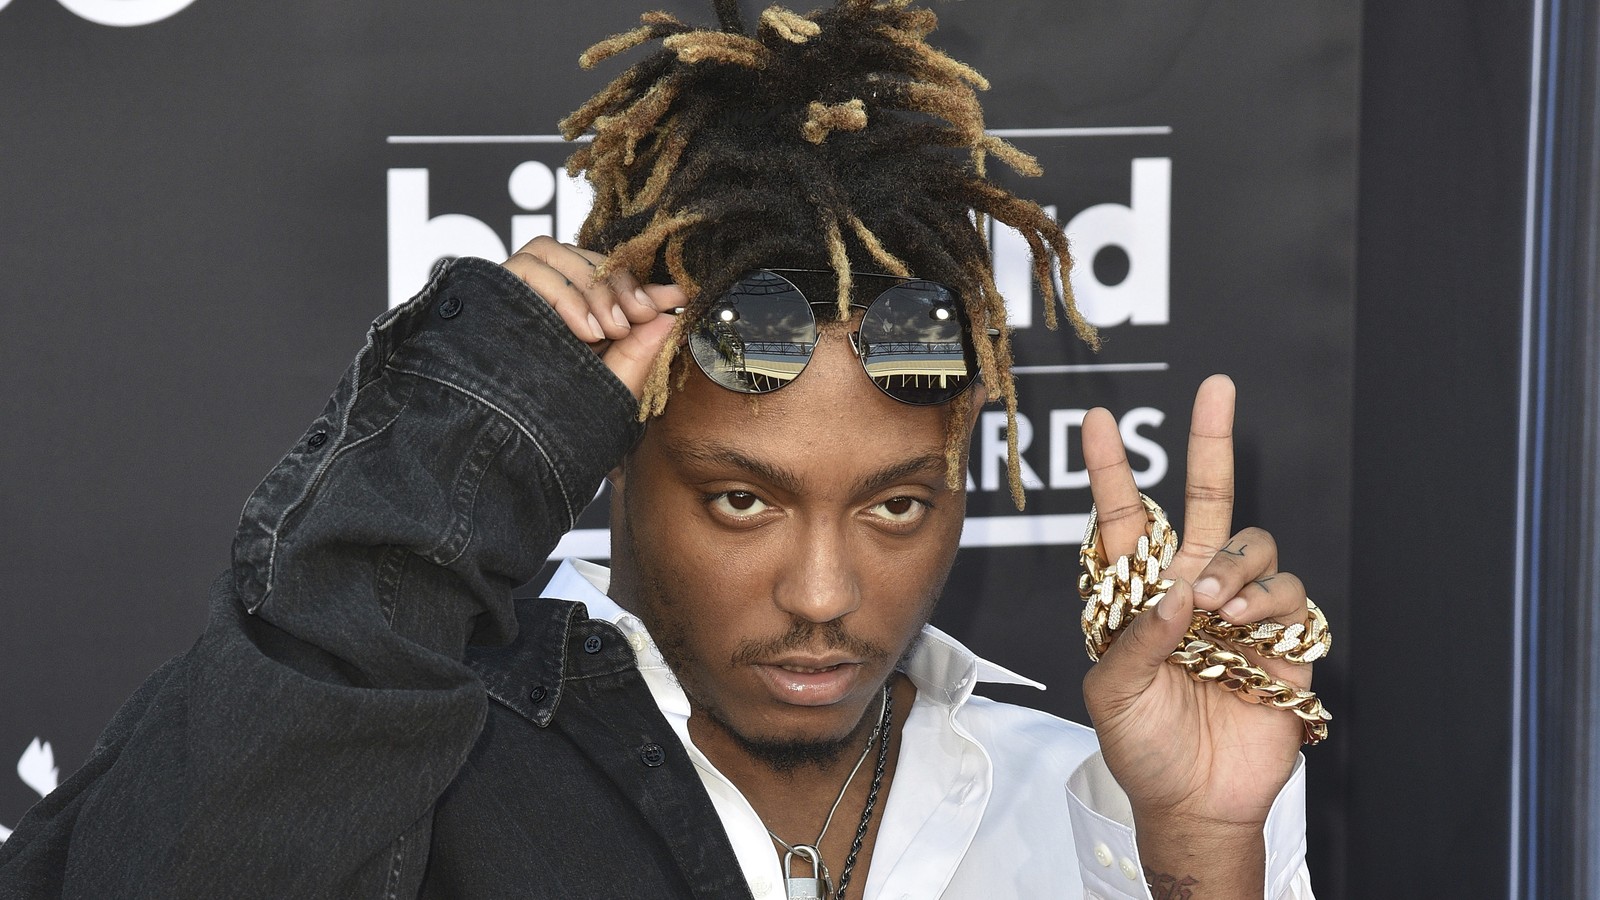 Juice Wrld dead: Rapper dies at Chicago airport, aged 21, The Independent